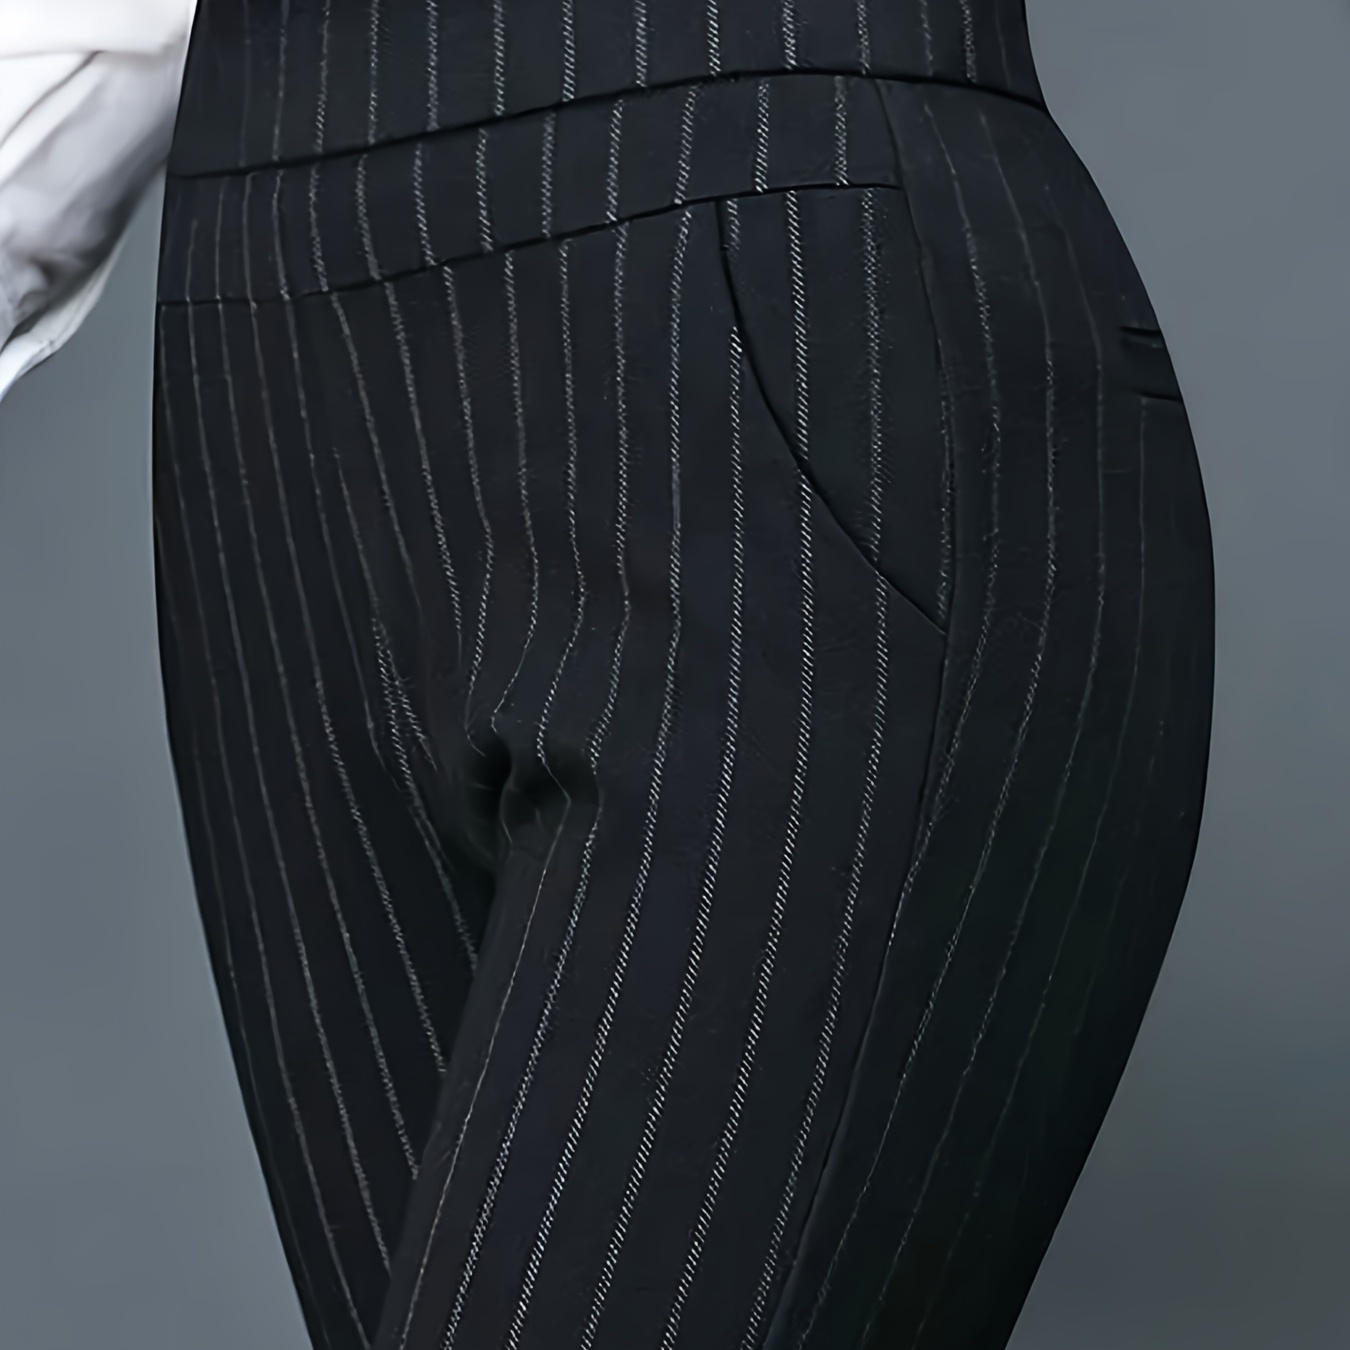 

Stripe Print Tapered Suit Pants, Elegant High Waist Pants For Work & Office, Women's Clothing